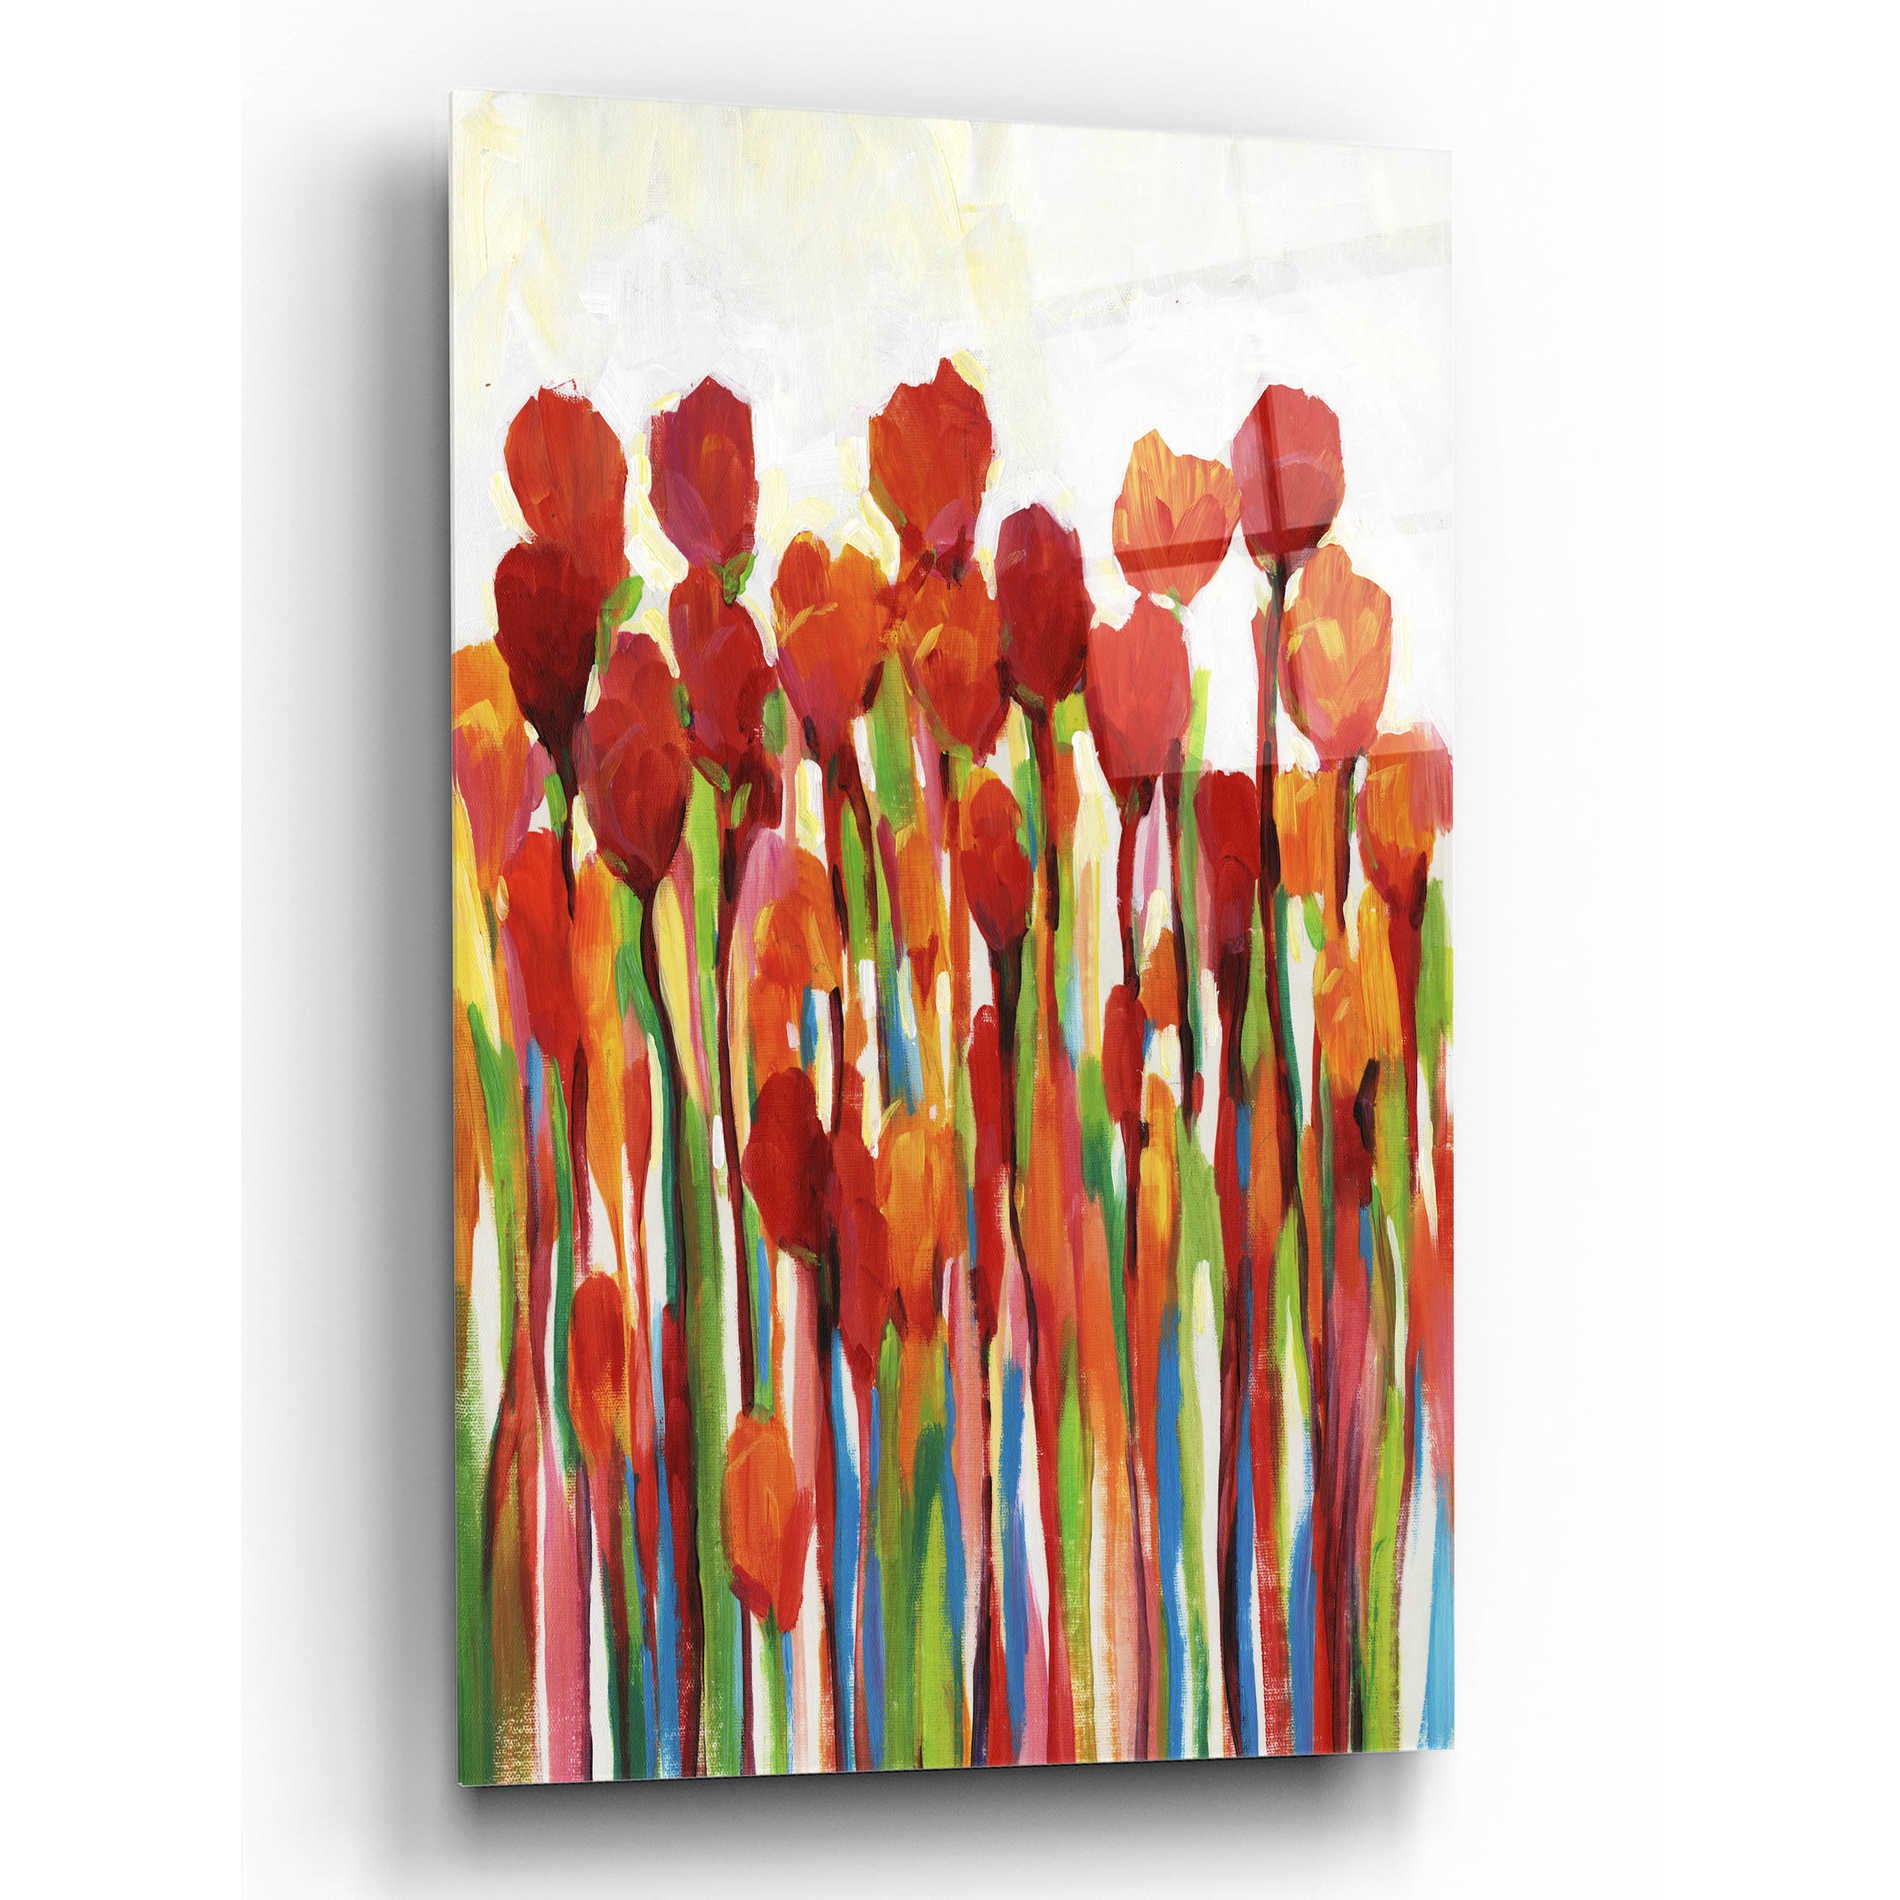 Epic Art 'Bursting with Color II' by Tim O'Toole, Acrylic Glass Wall Art,12x16